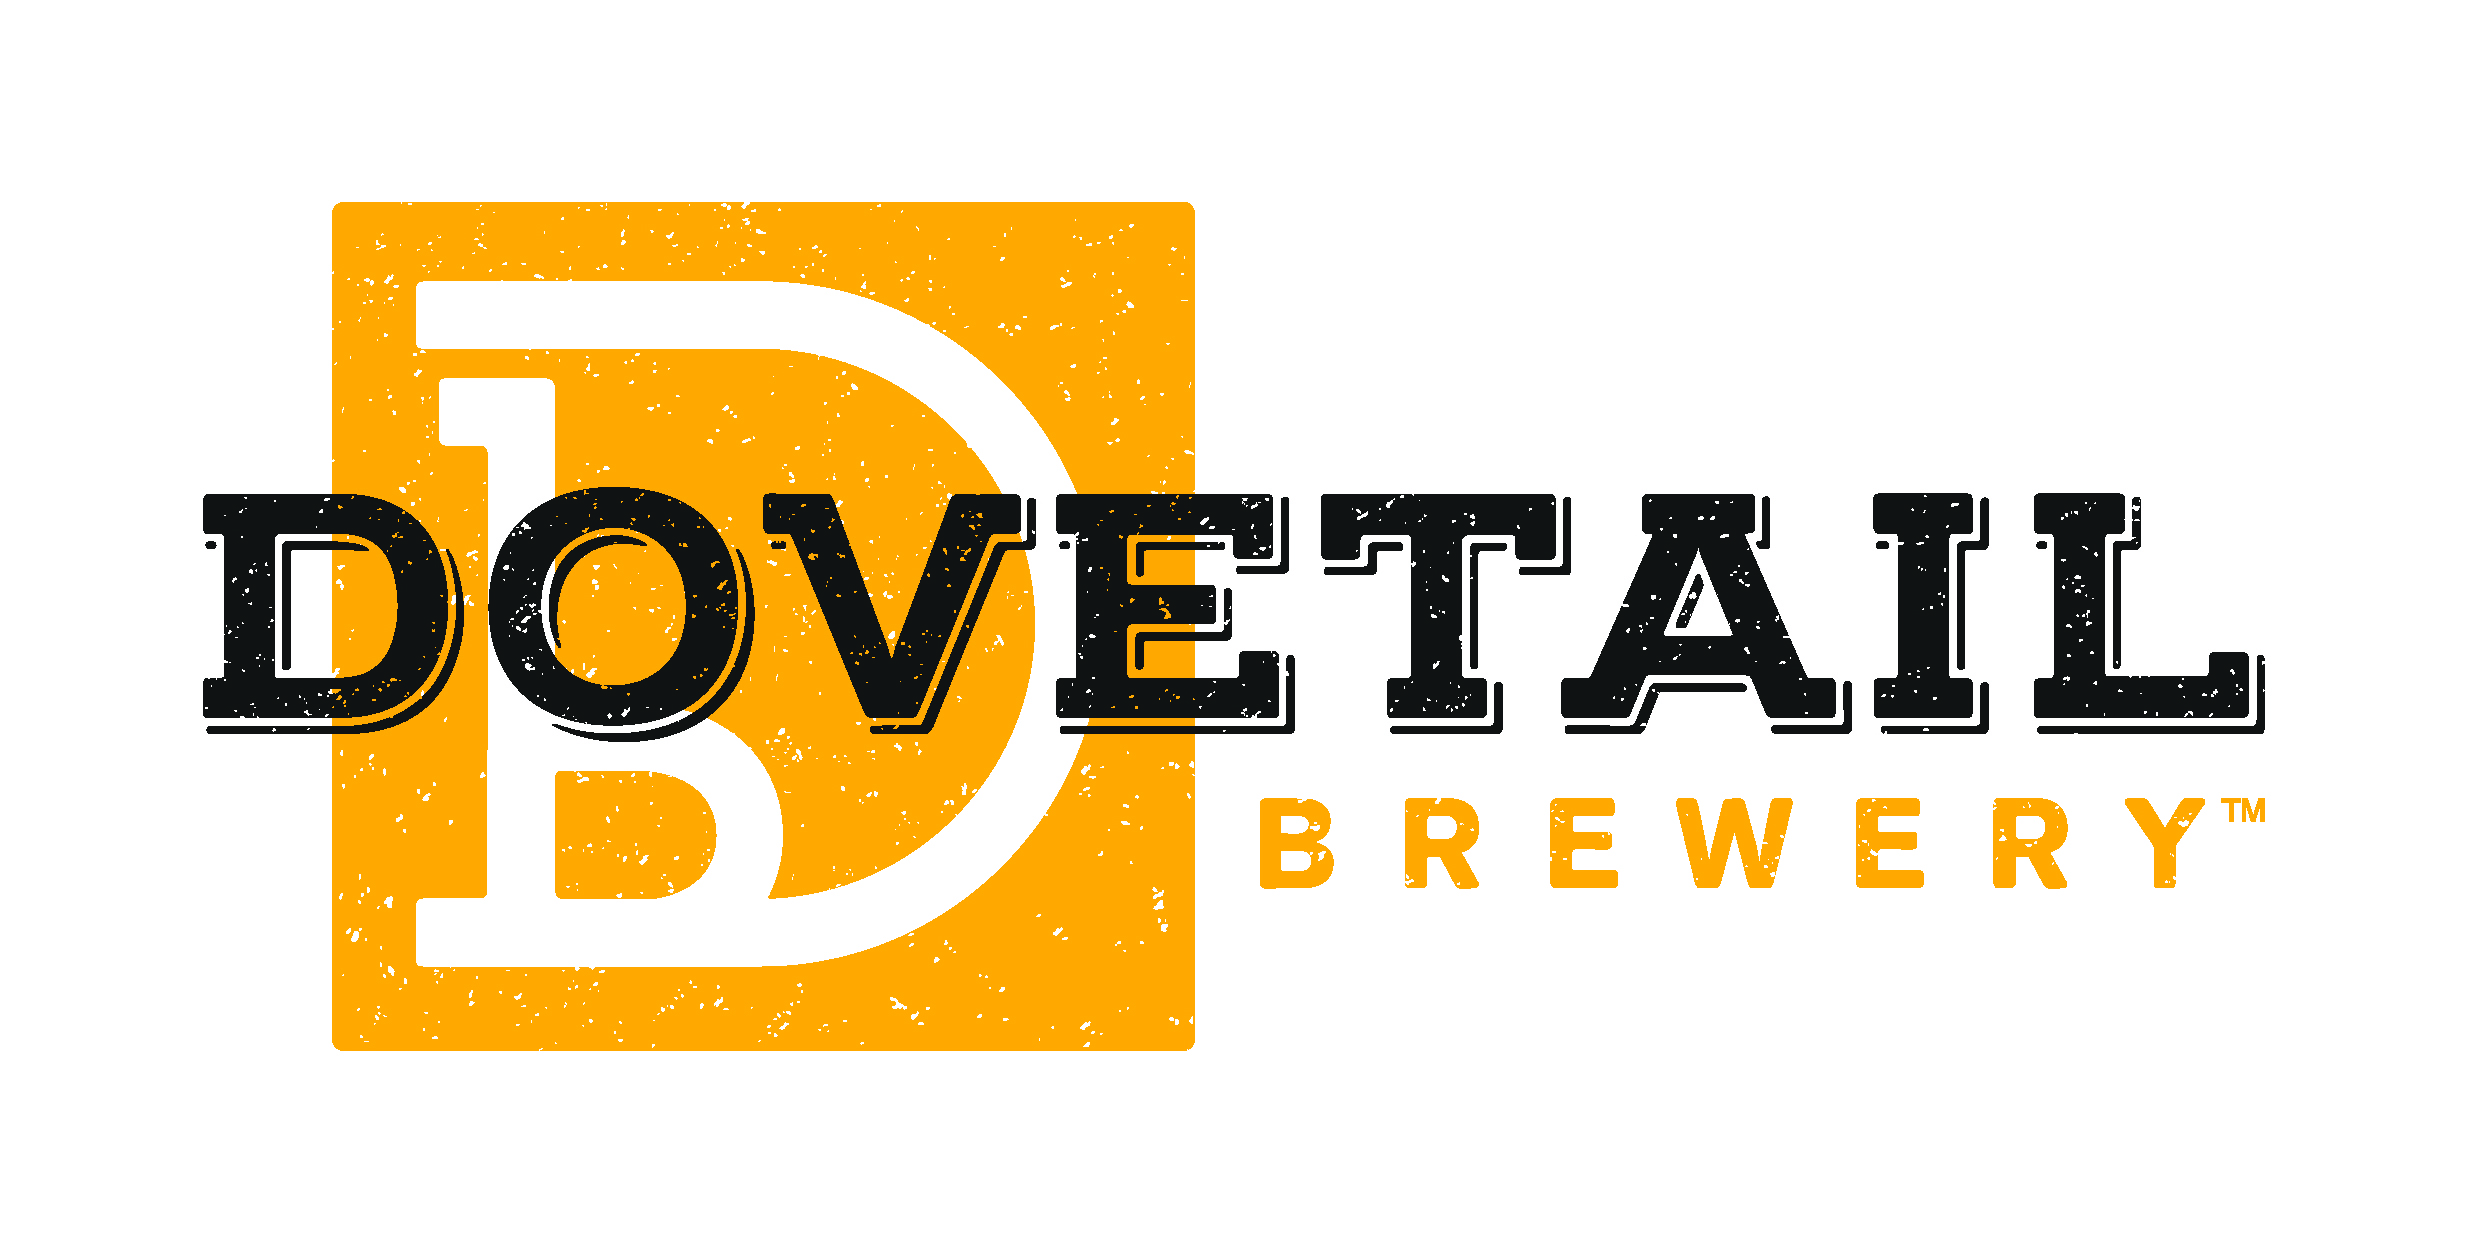 Dovetail brewery